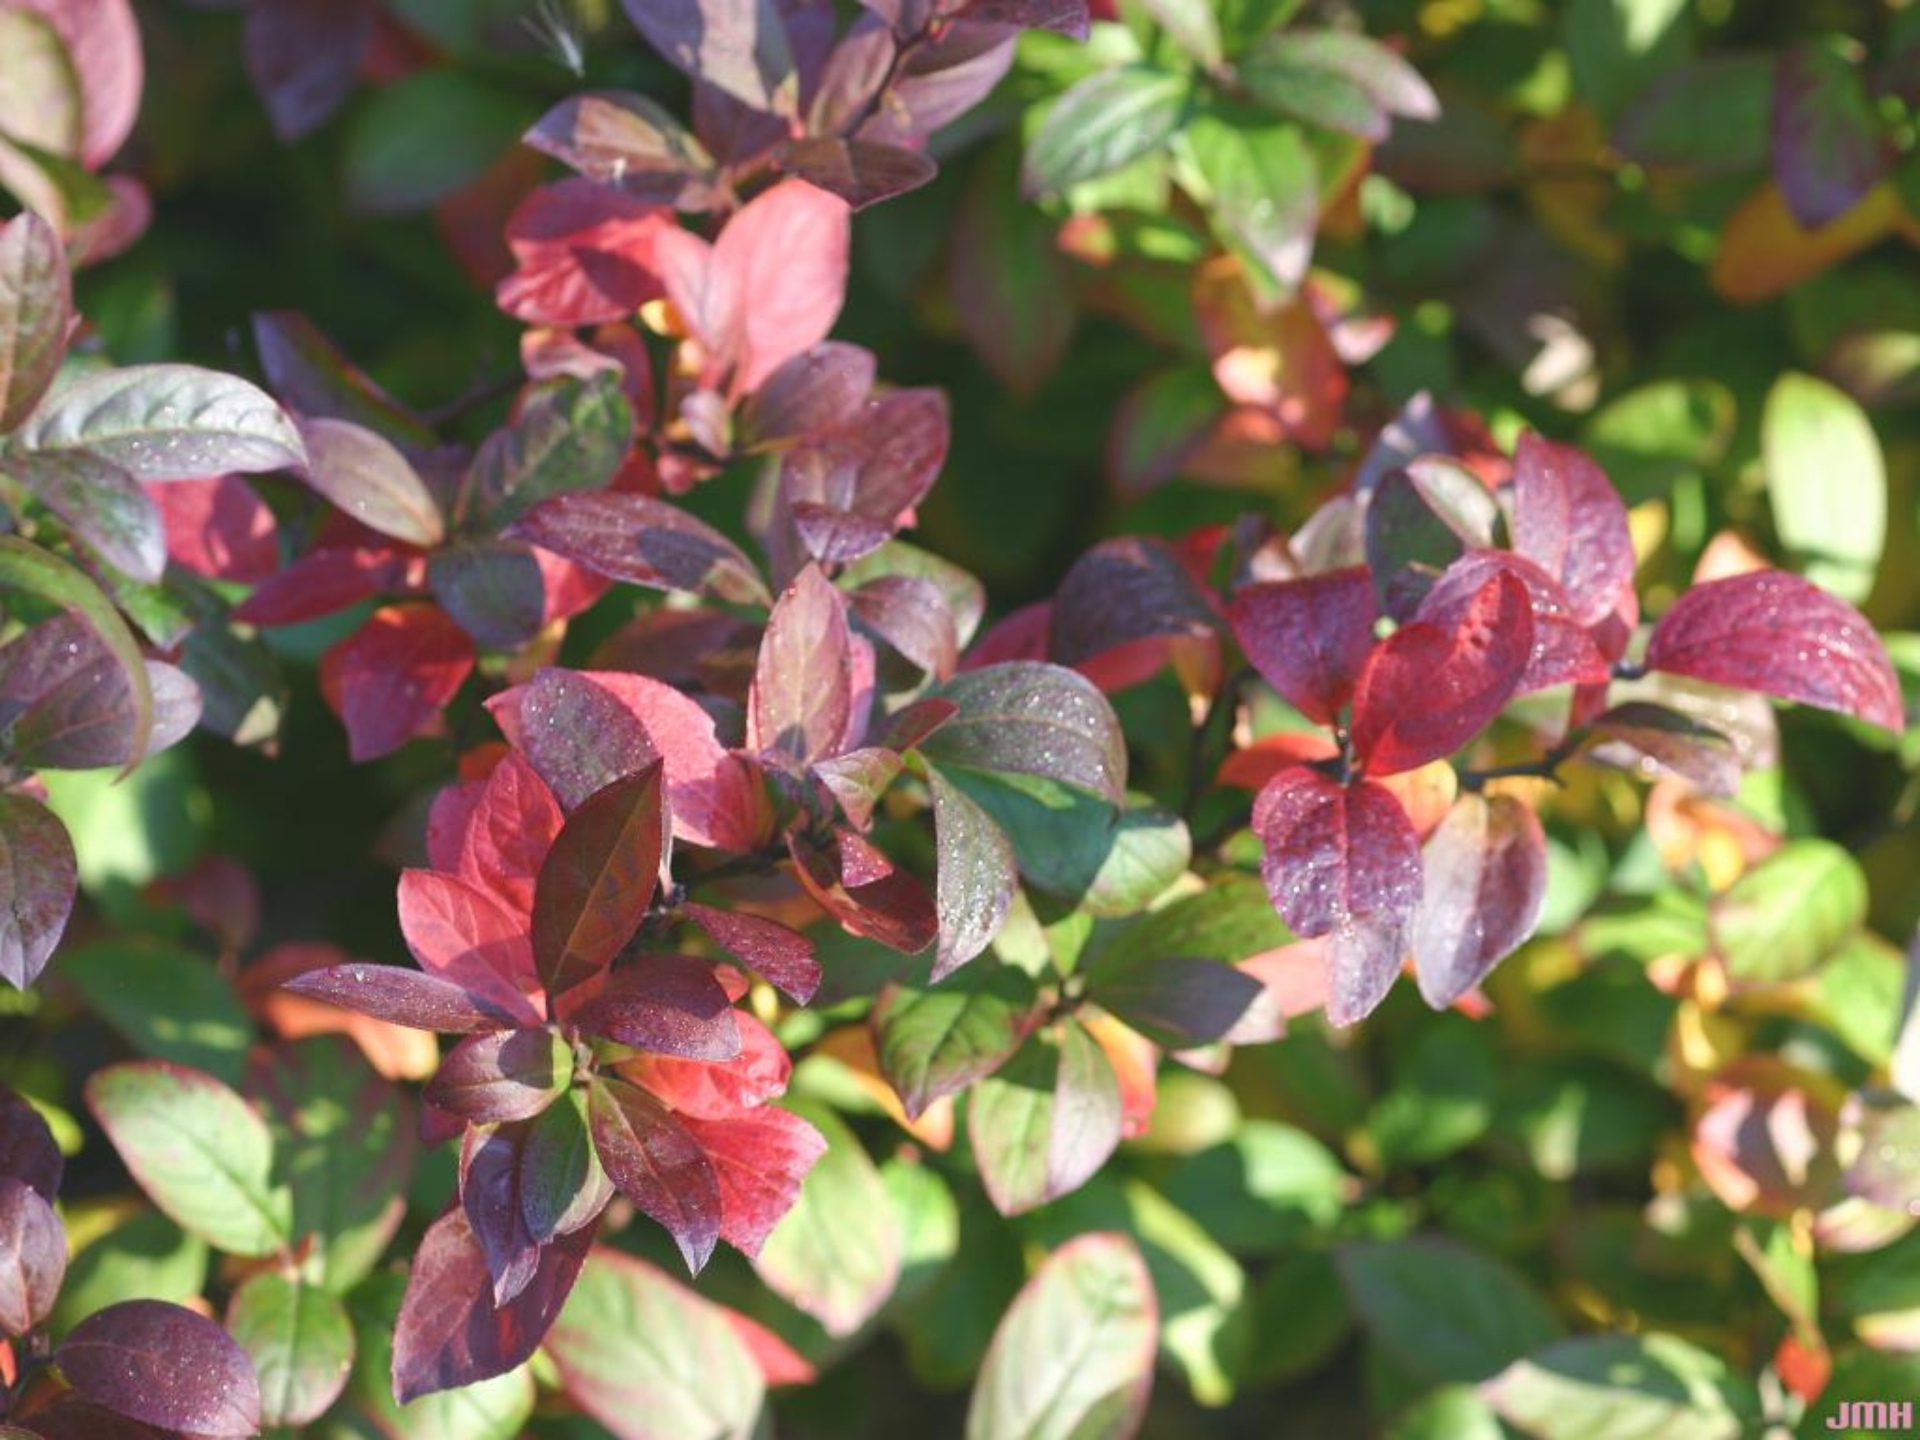 Itea virginica ‘Morton’ (sweetspire – SCARLET BEAUTY™), image shows reddish fall colored leaves.